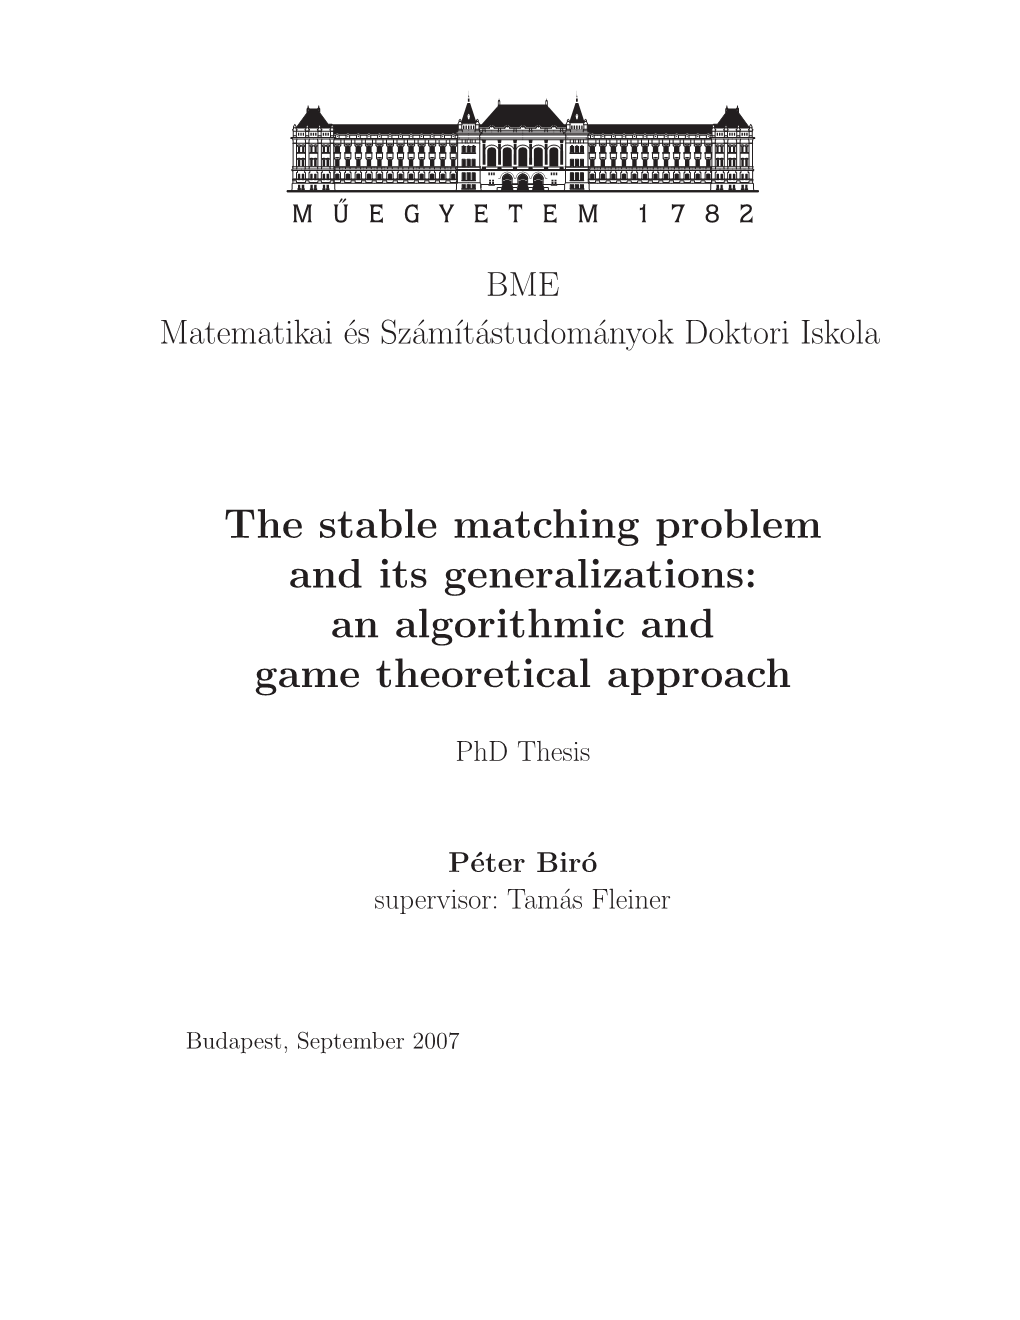 The Stable Matching Problem and Its Generalizations: an Algorithmic and Game Theoretical Approach